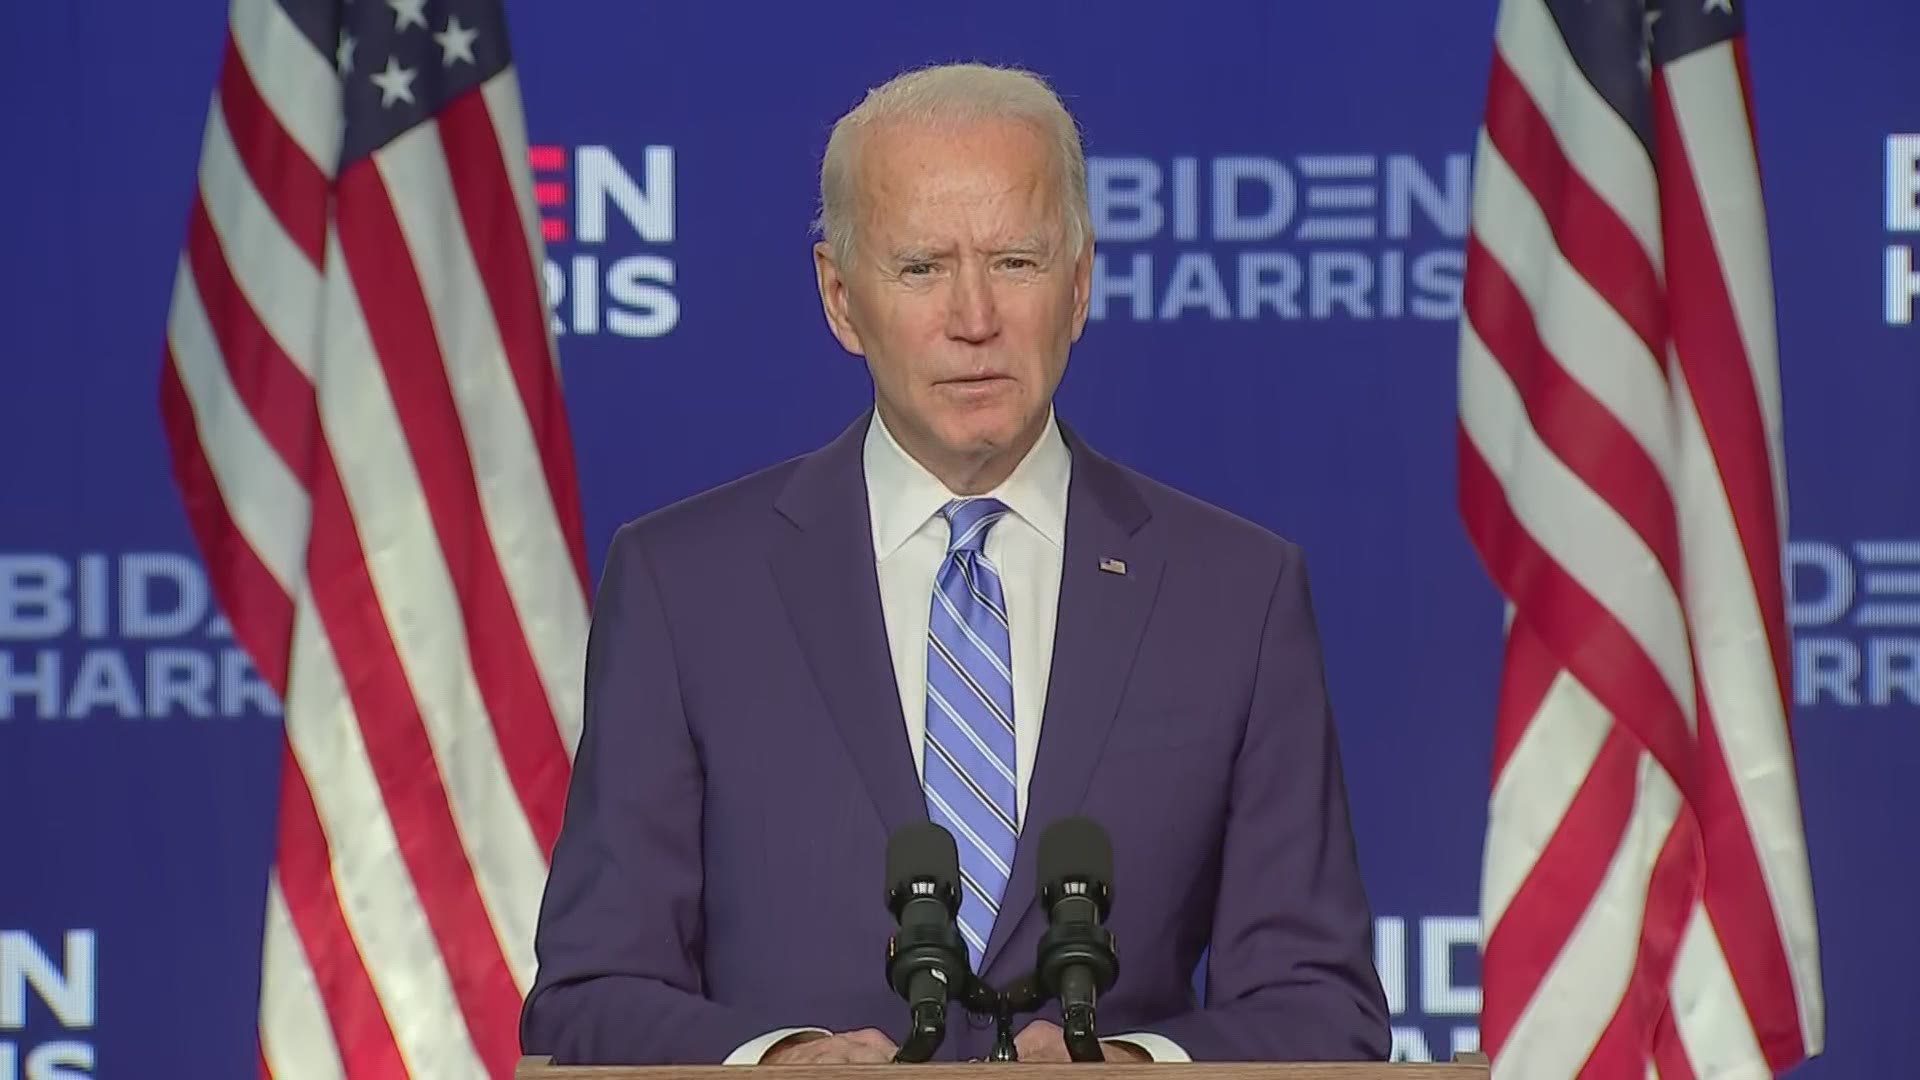 On the day after Election Day, Joe Biden said they're not declaring victory but feel when the votes are all counted that they will win the presidency.